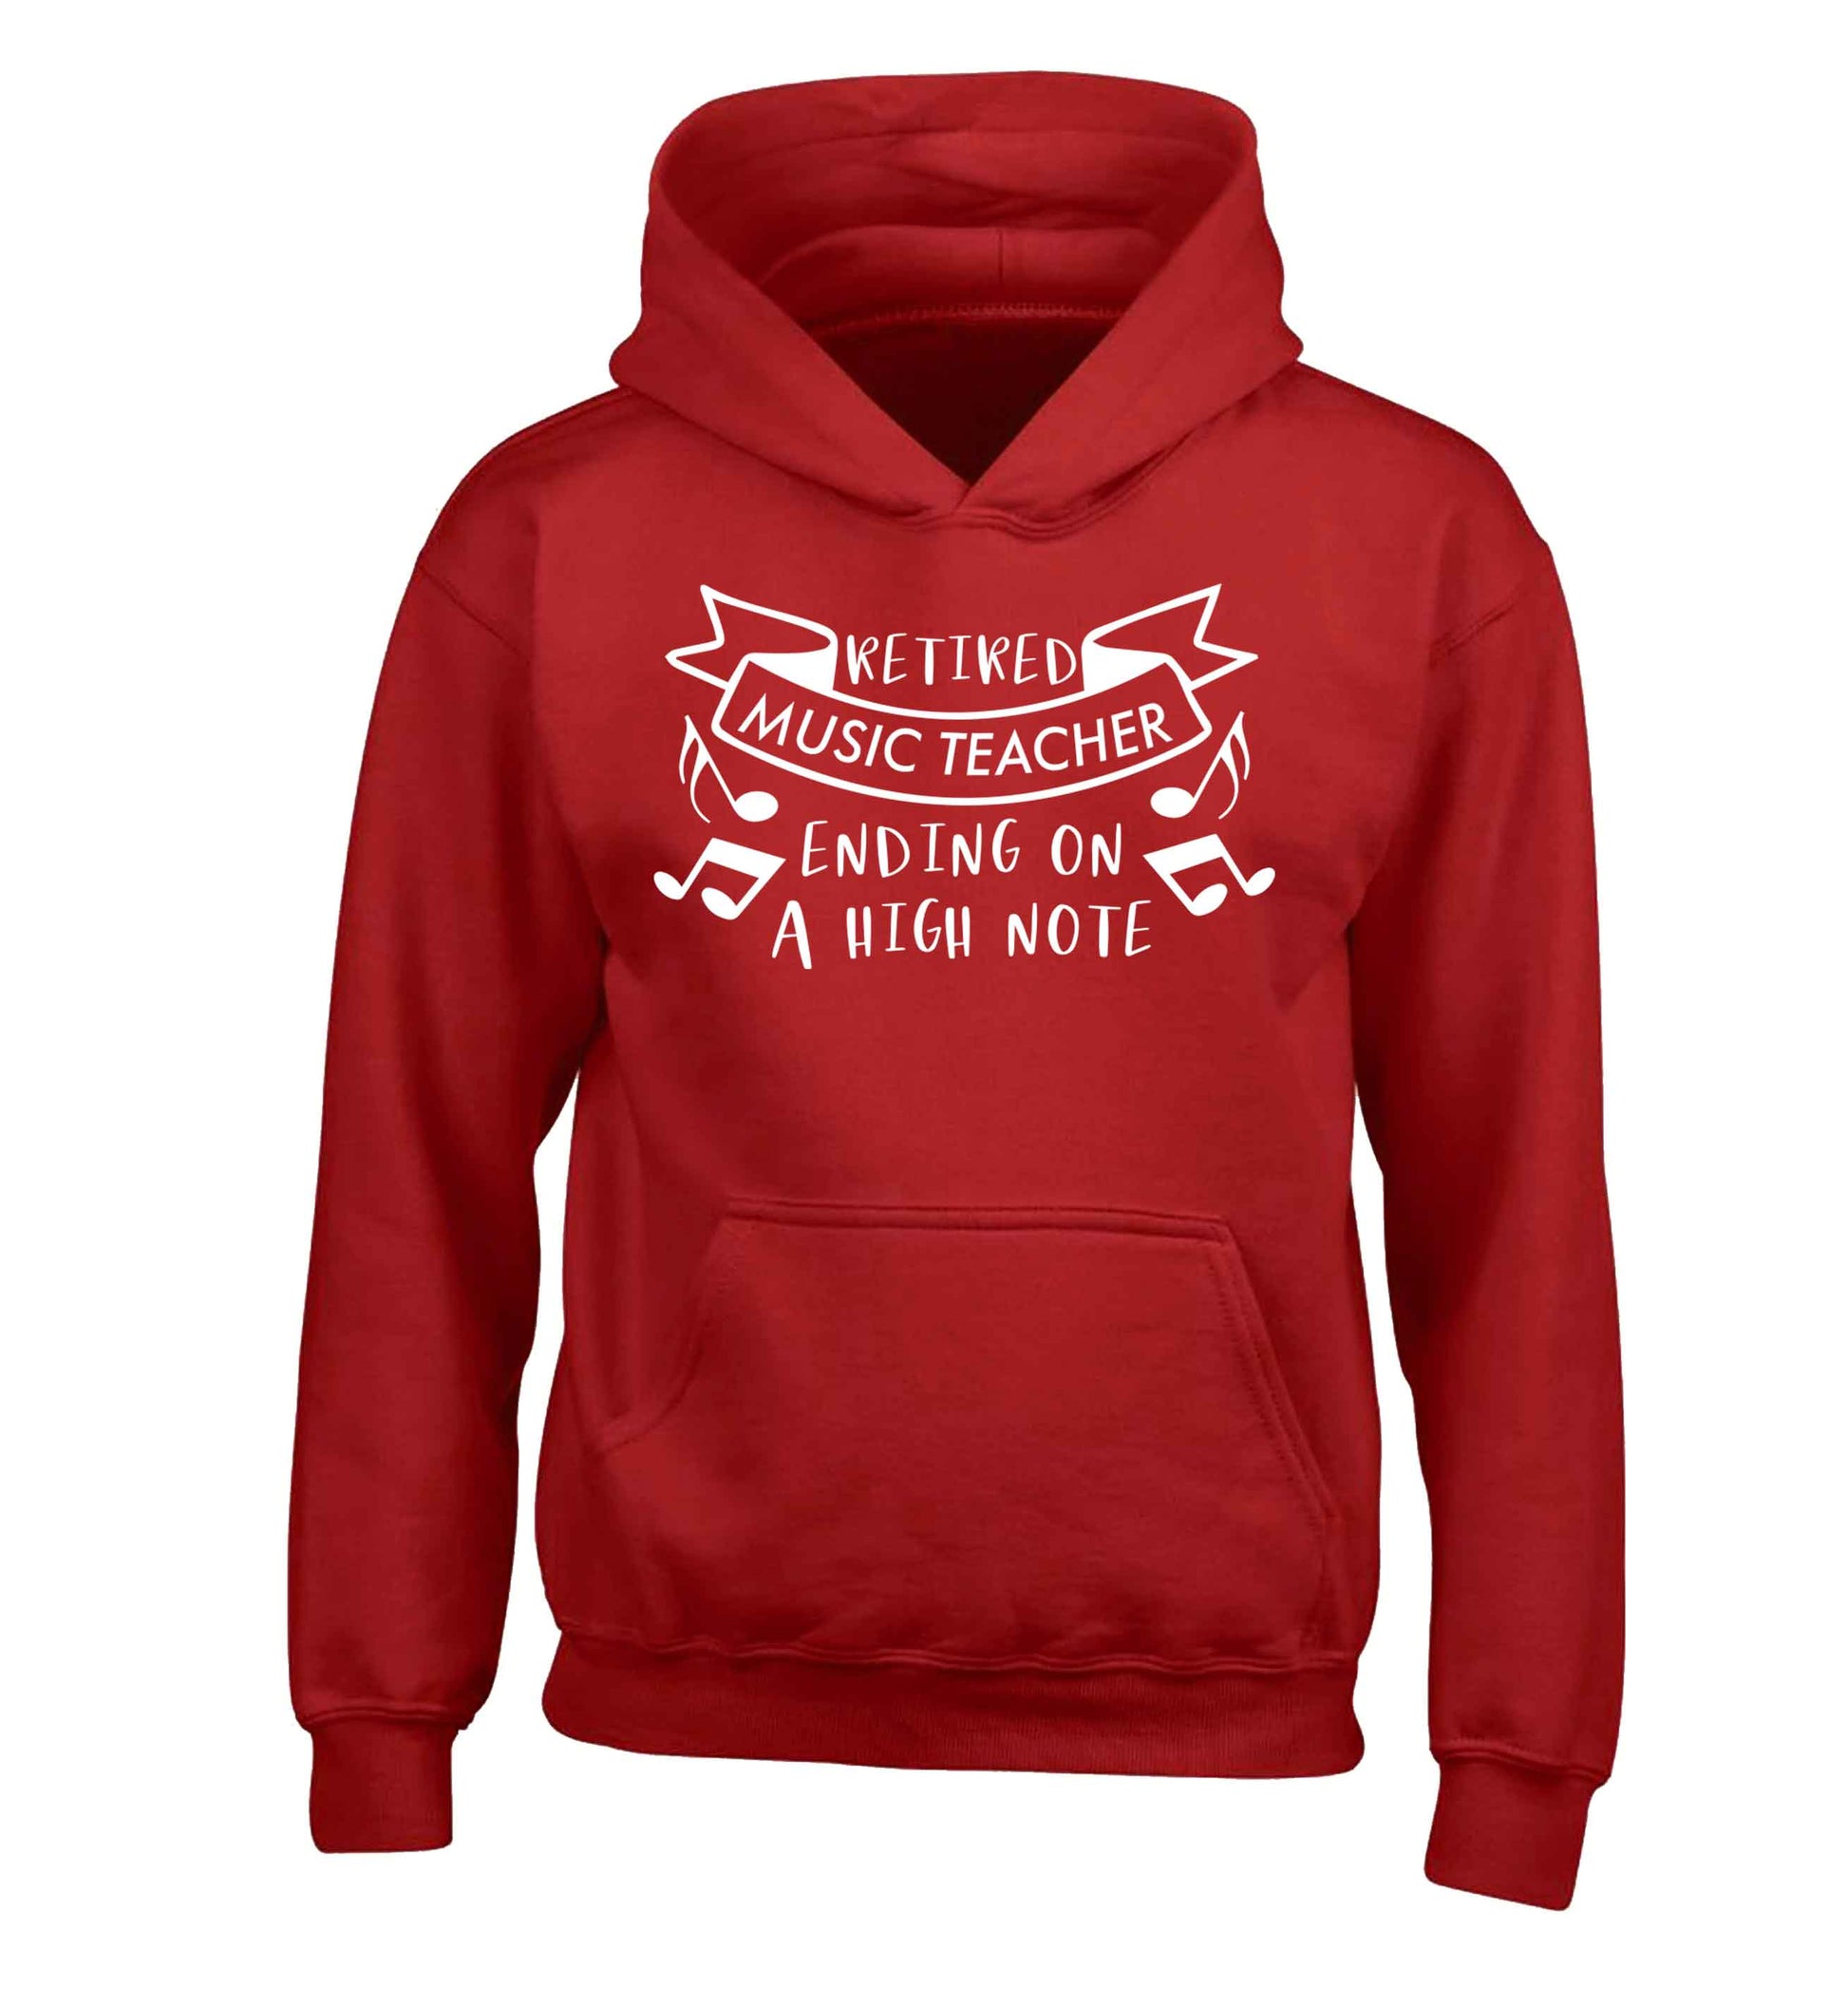 Retired music teacher ending on a high note children's red hoodie 12-13 Years